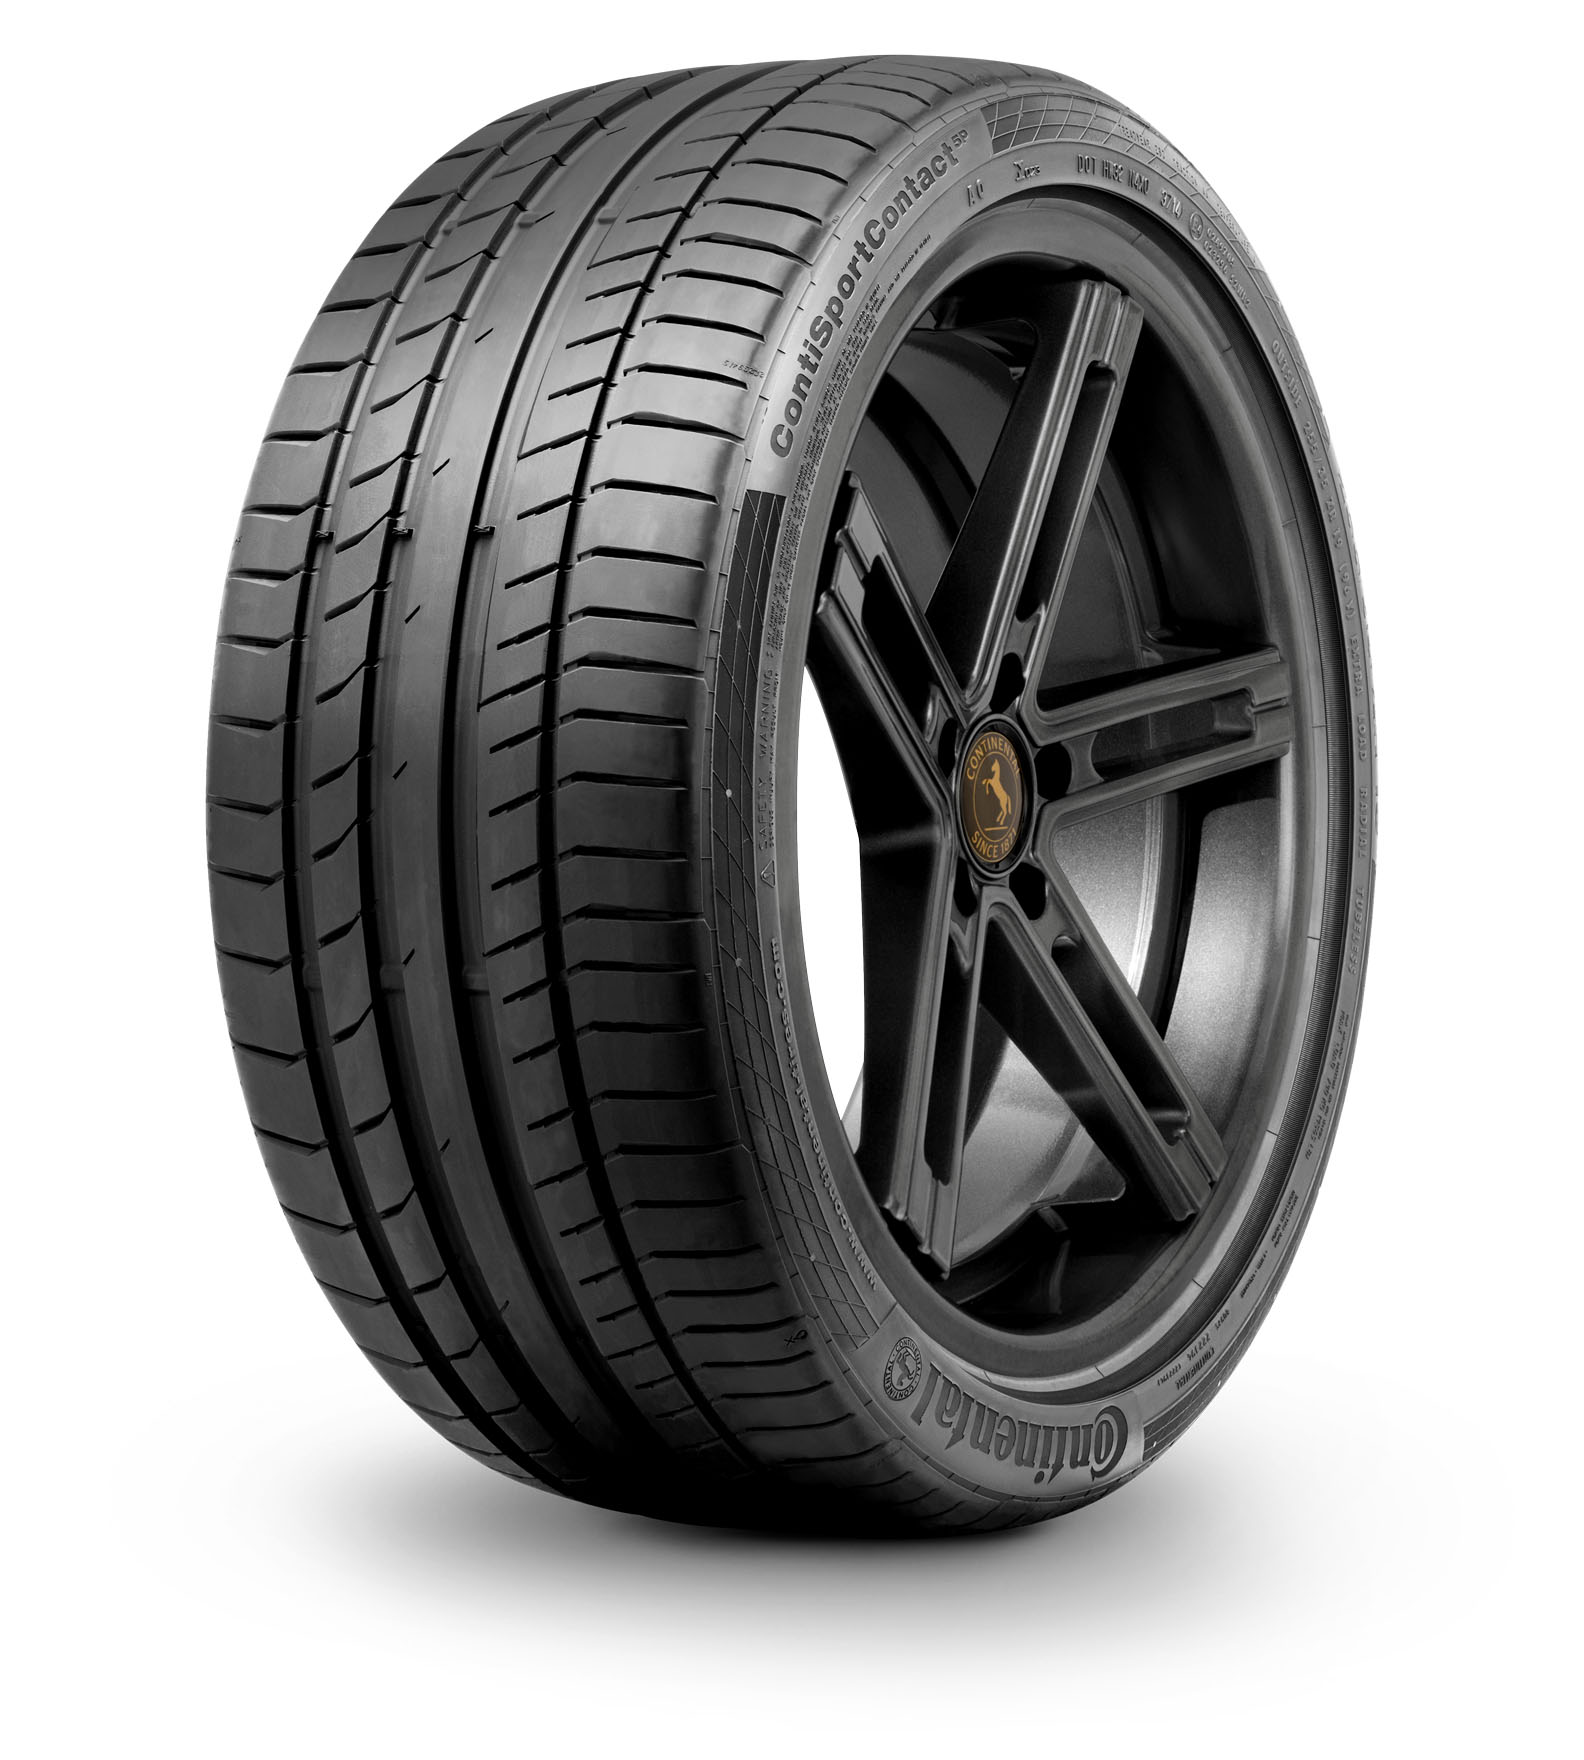 Continental 275/50R19 112Y ContiSportContact™ 5 P N0 DOT21